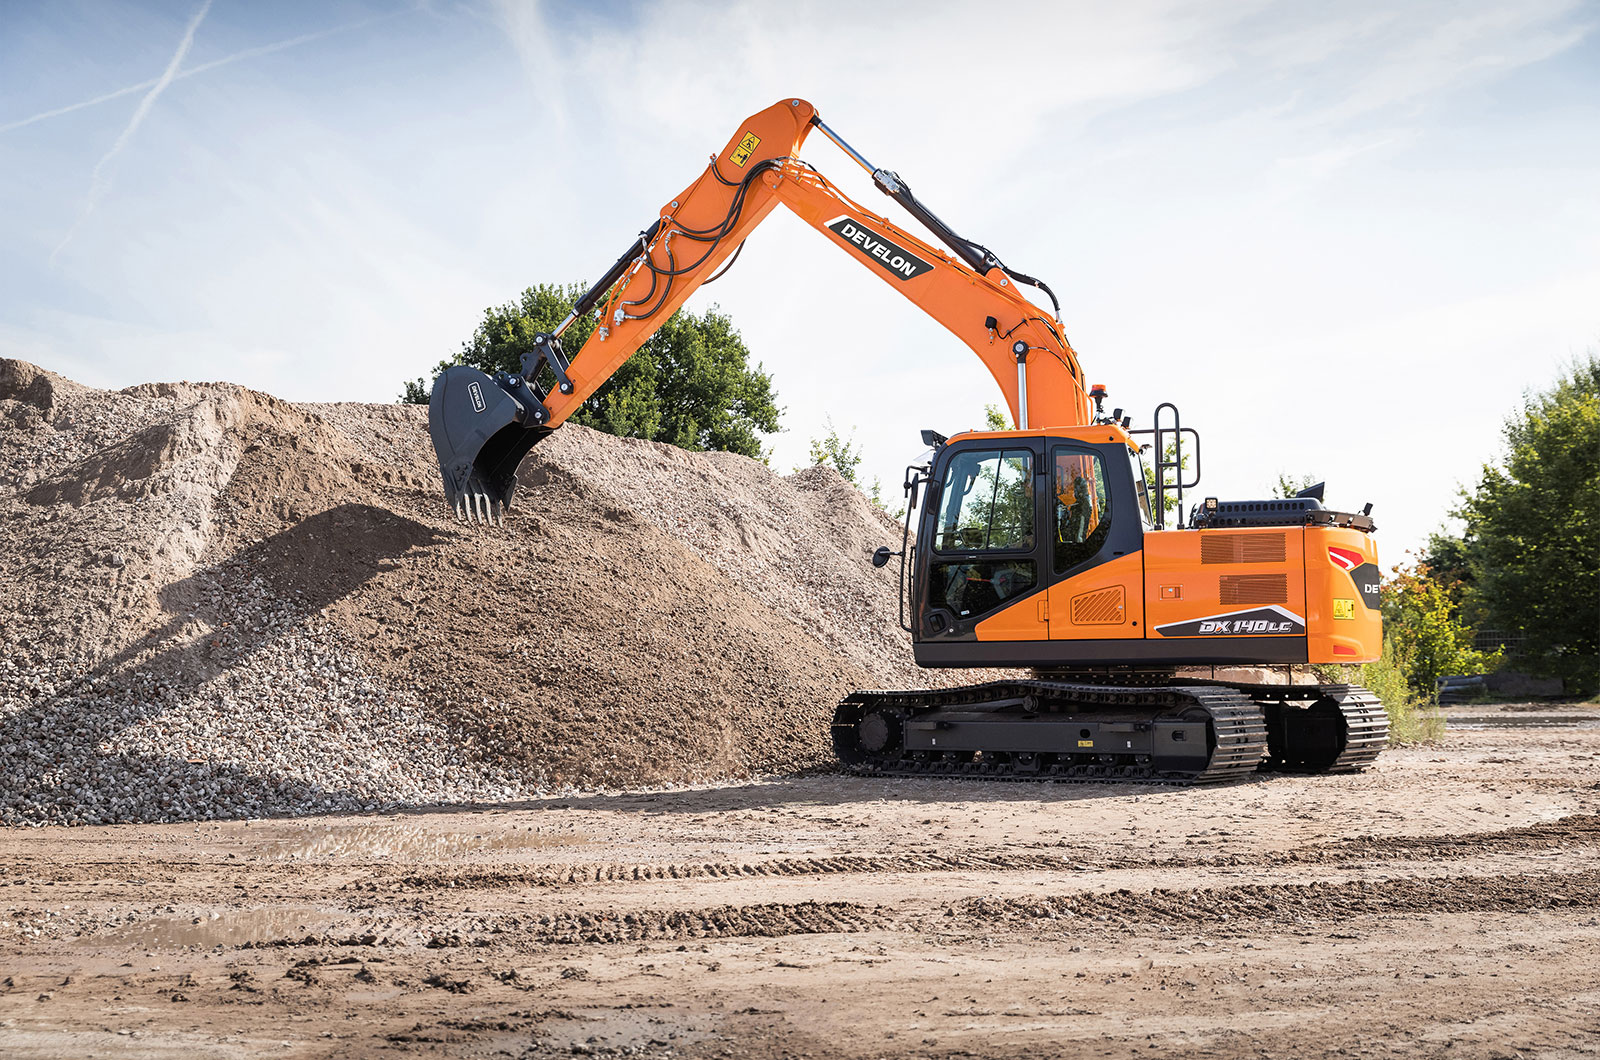 Suppliers of Doosan and Gehl Manufacturing Equipment